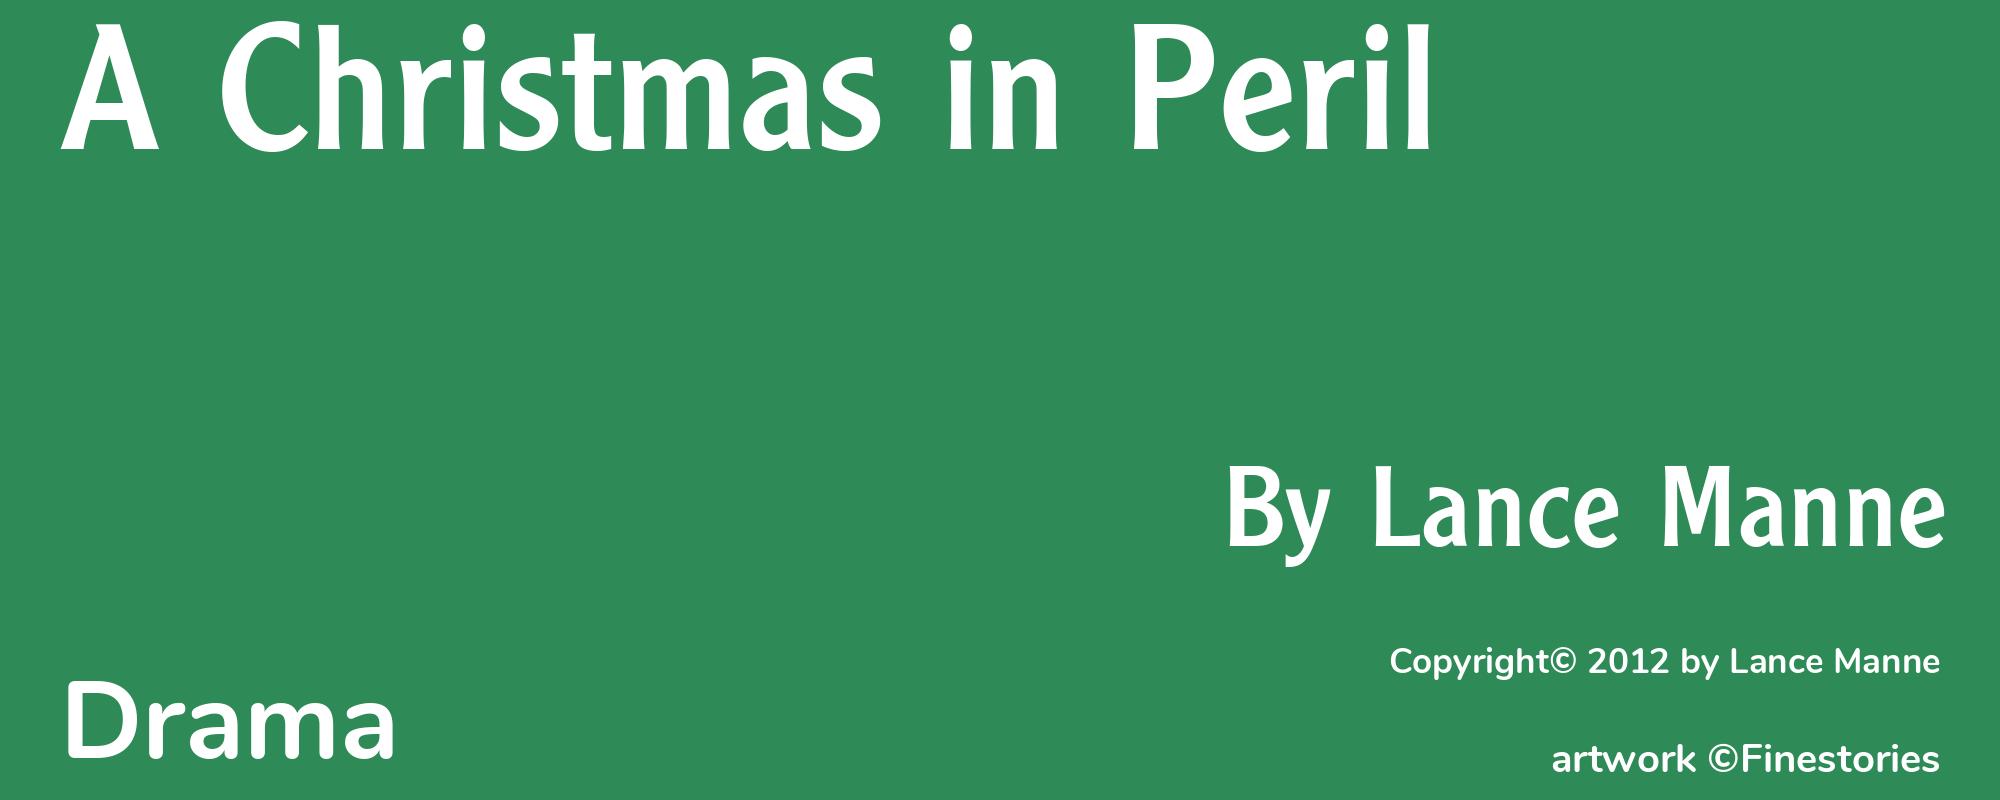 A Christmas in Peril - Cover